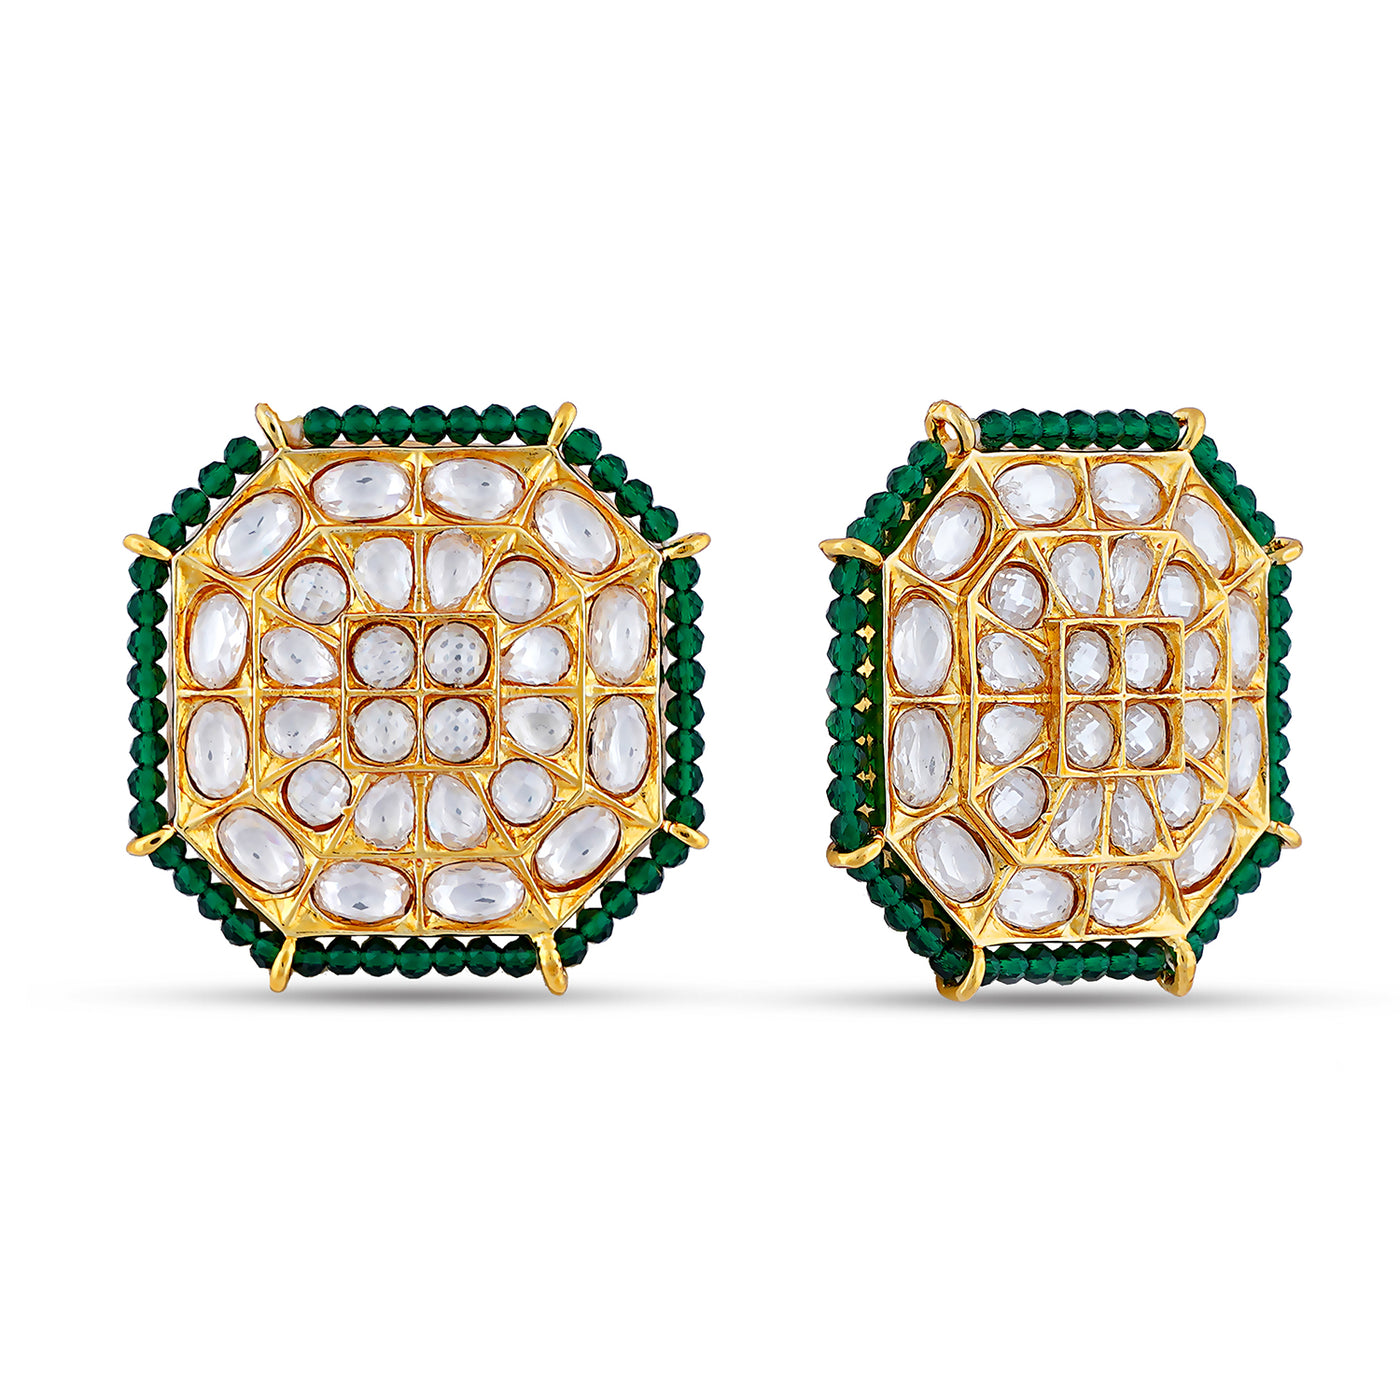 Green Bead Kundan Stud Earrings. Front View and Side View.